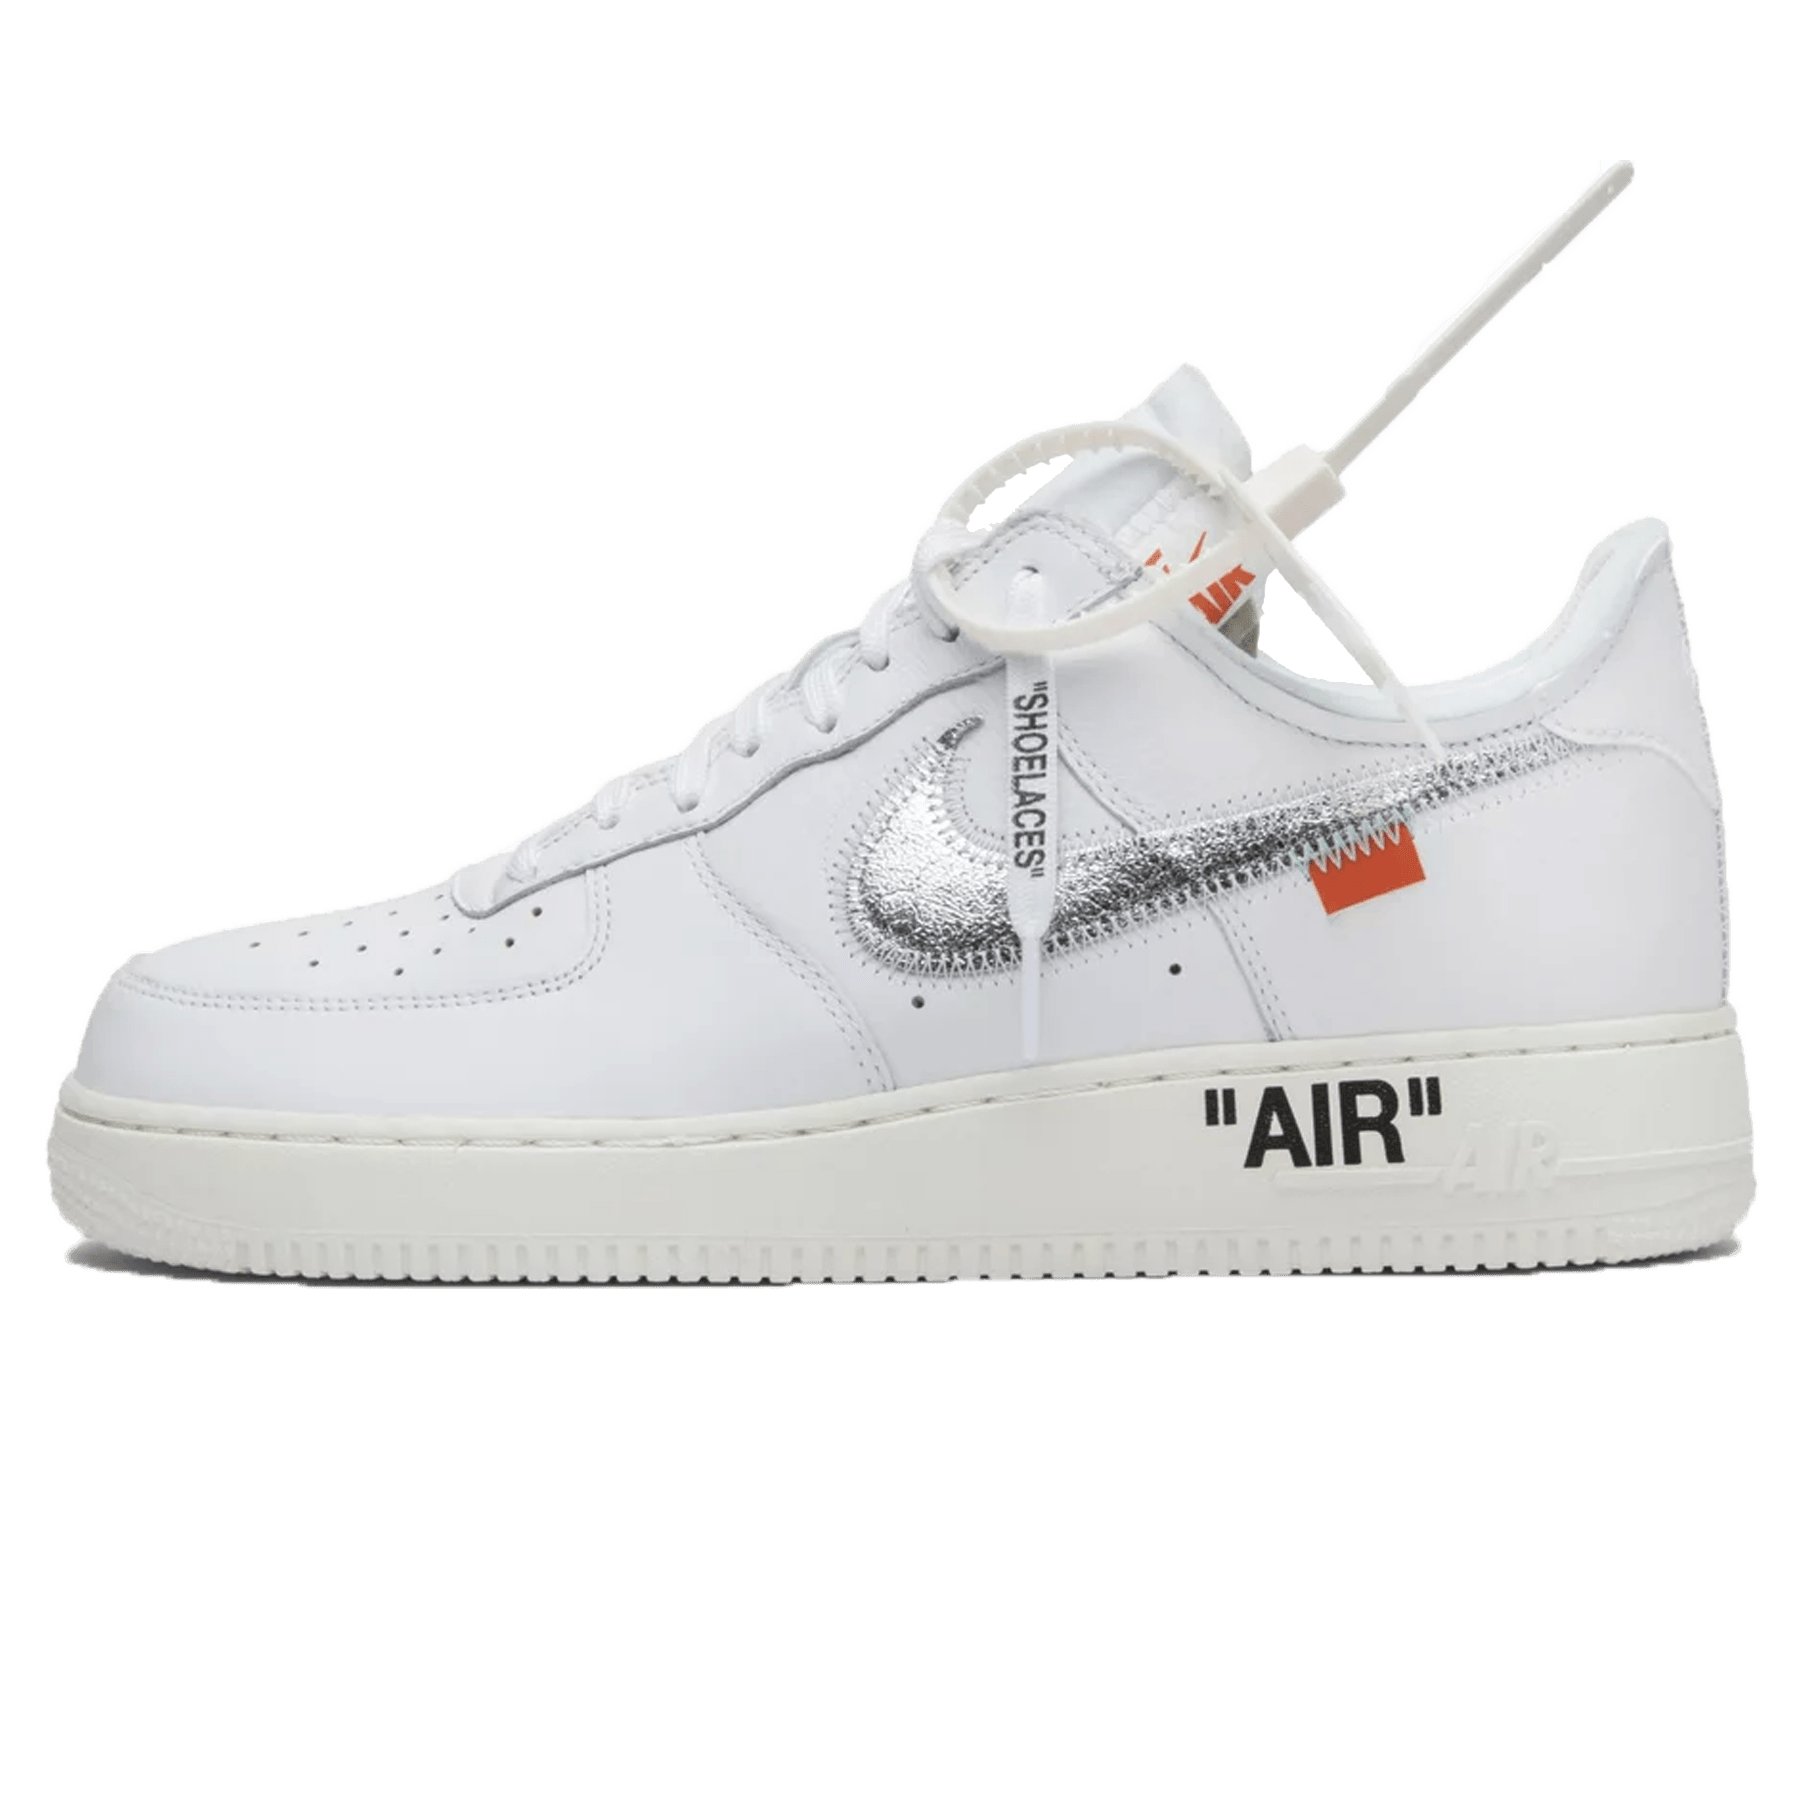 NIKE OFF WHITE AF1 Complexcon Air Force 1 Size 8.5 $4,000.00